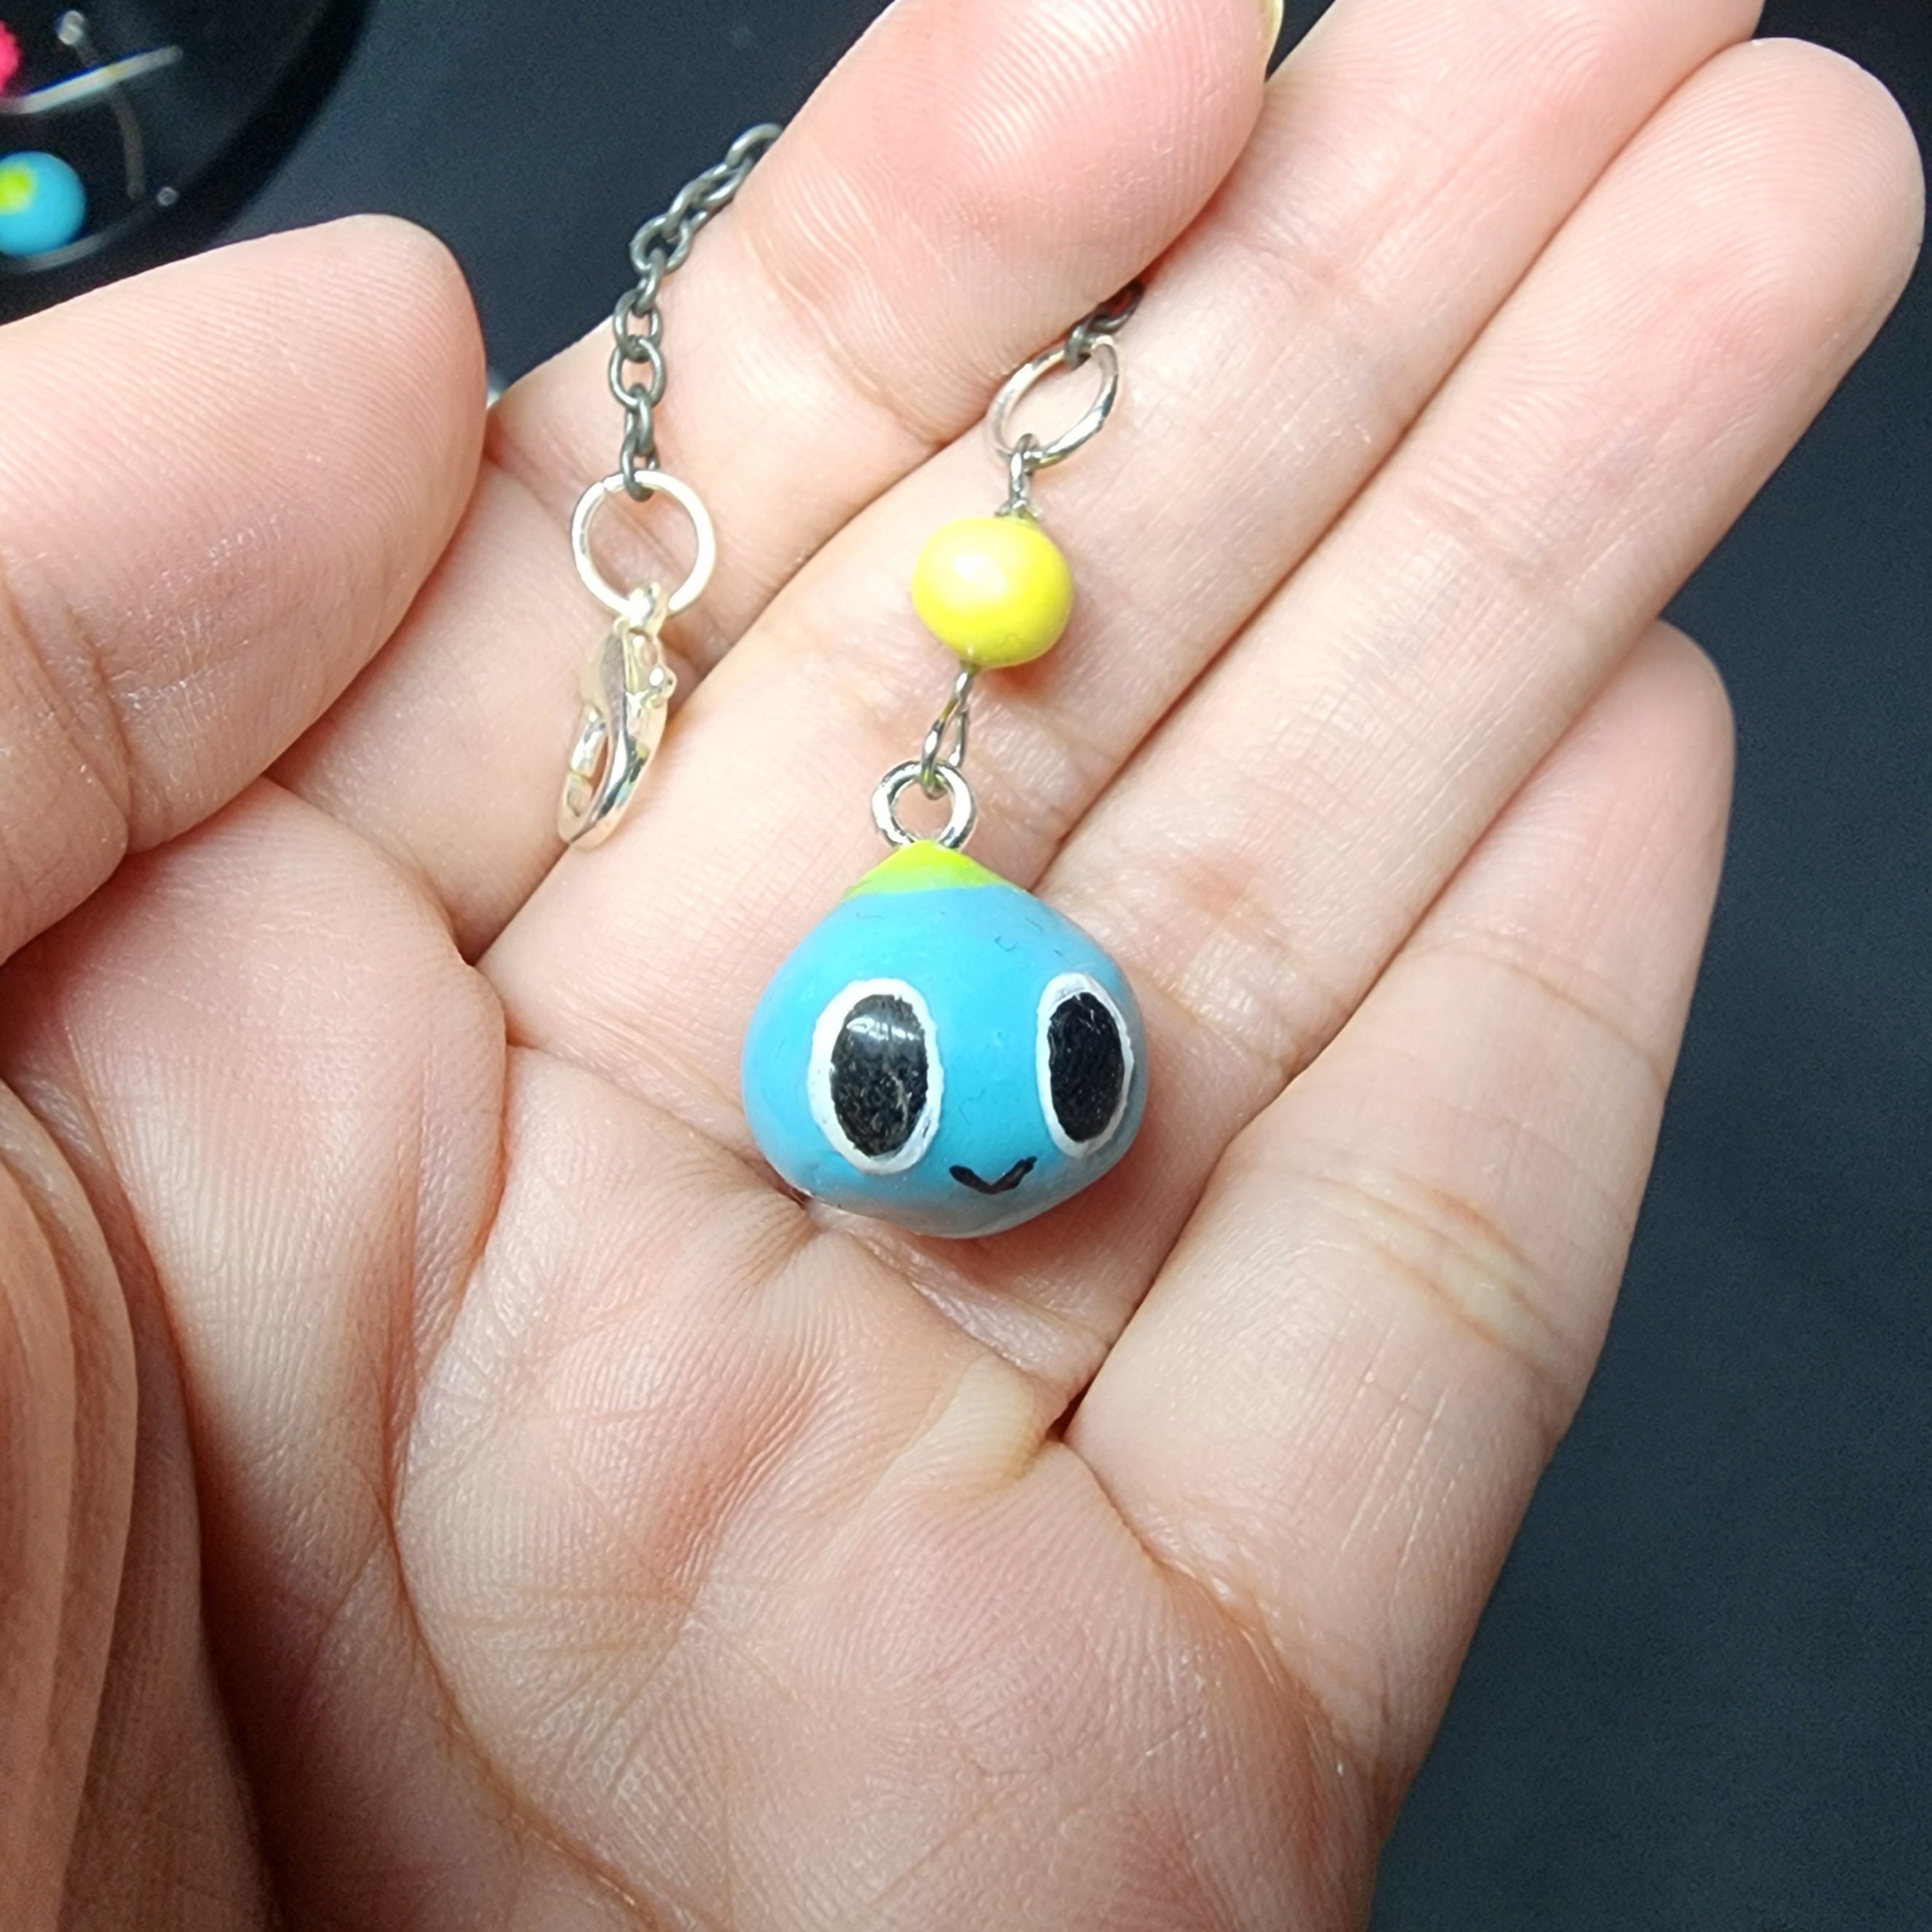 Sonic Chao Expressions Key Chain